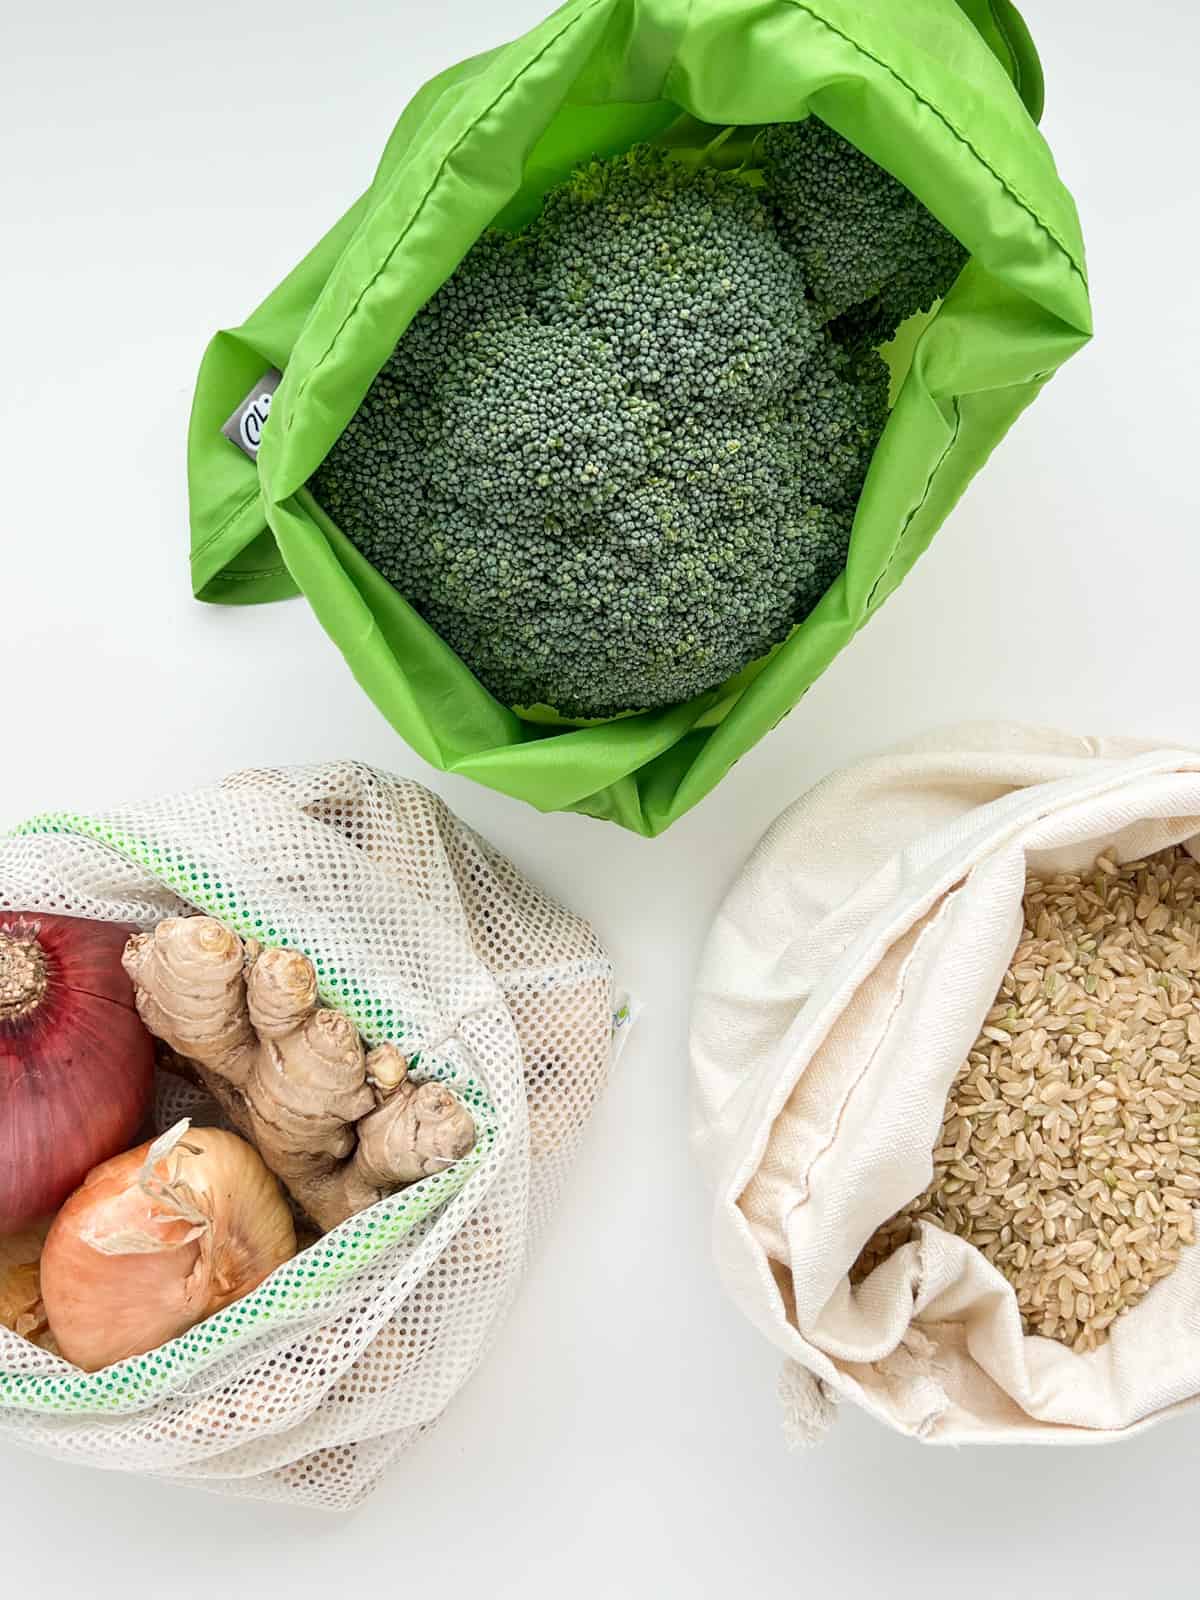 An image of different types of resuable bags for a lower waste kitchen.